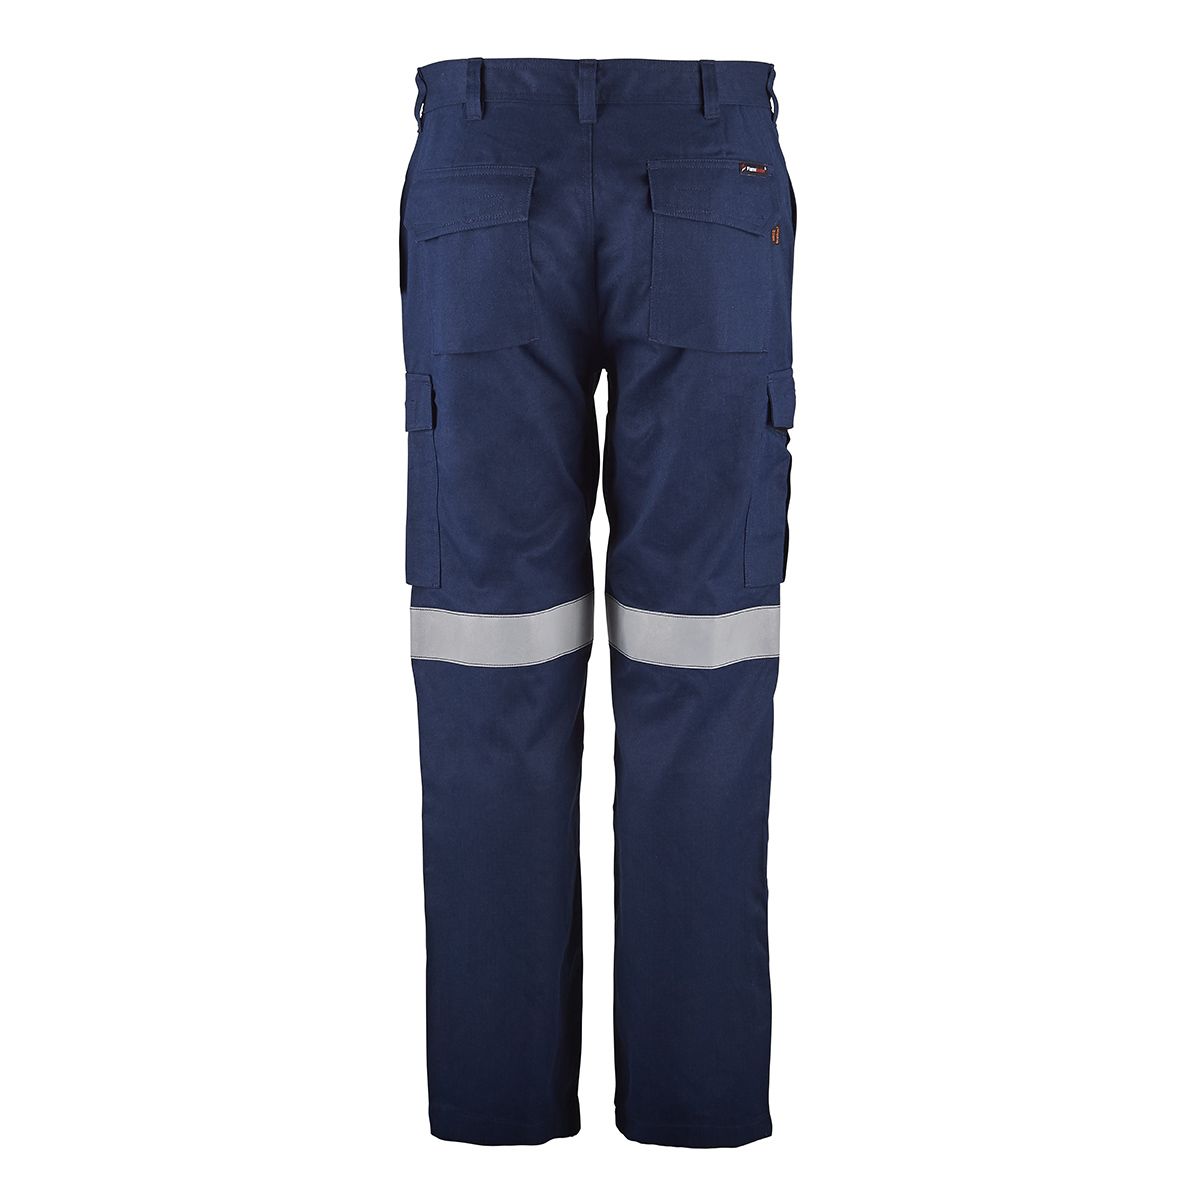 FlameBuster Torrent Fr Navy Taped Cargo Pants atpv 11.5/HRC2 240g 77R